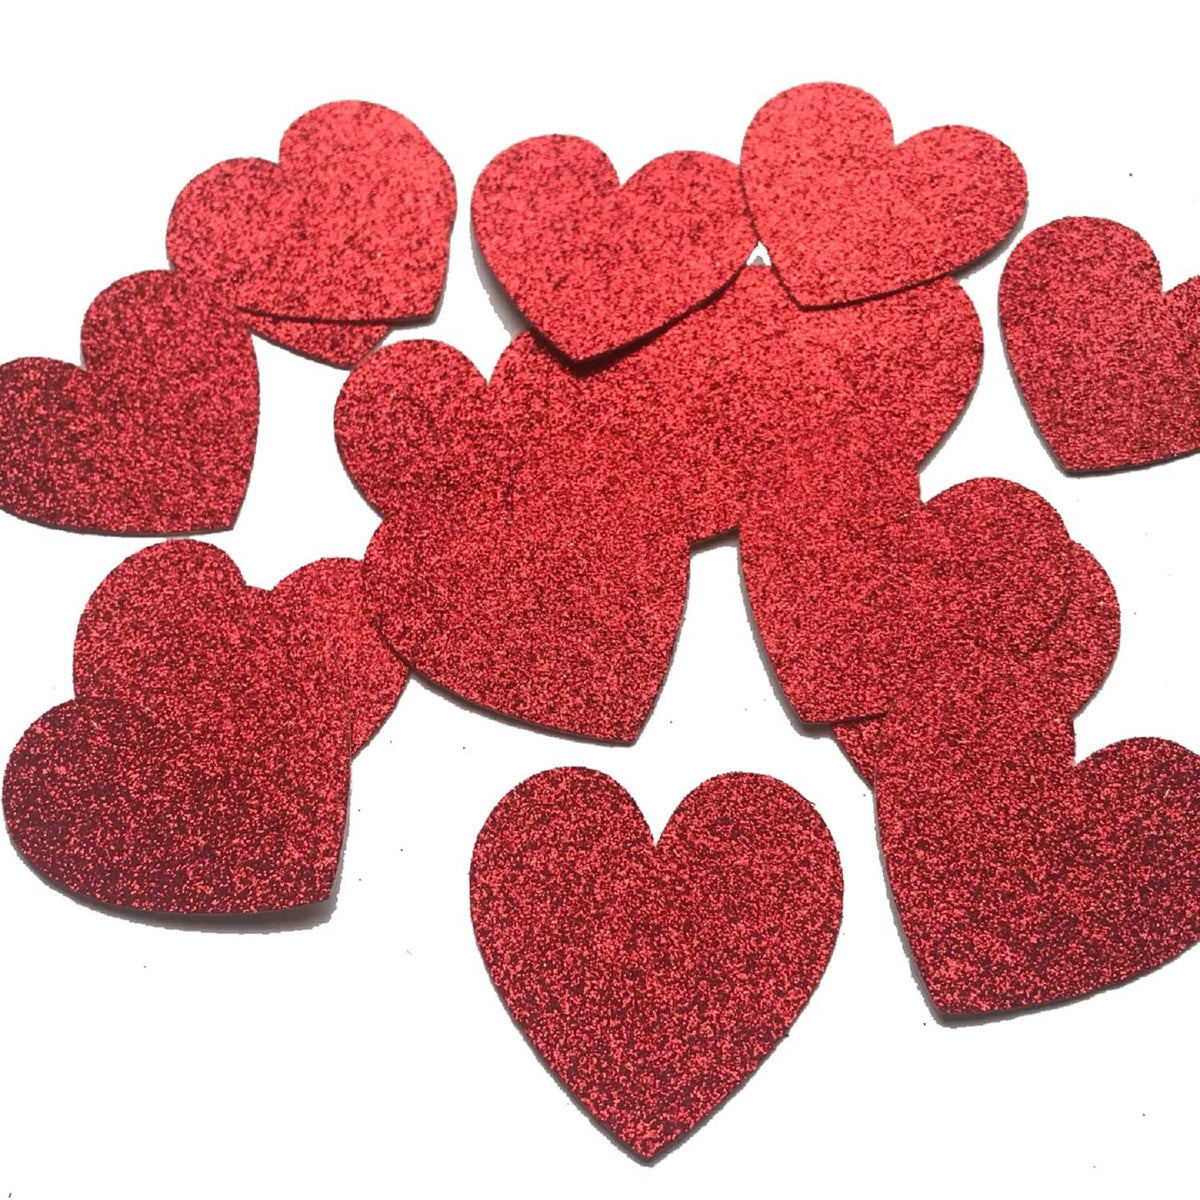 3 Inch Size 50 Pieces Heart Shaped Glitter Heart Cutout Sticker Red Heart Decorations, Valentine's Day Decorations (Medium, 50) - Haoser